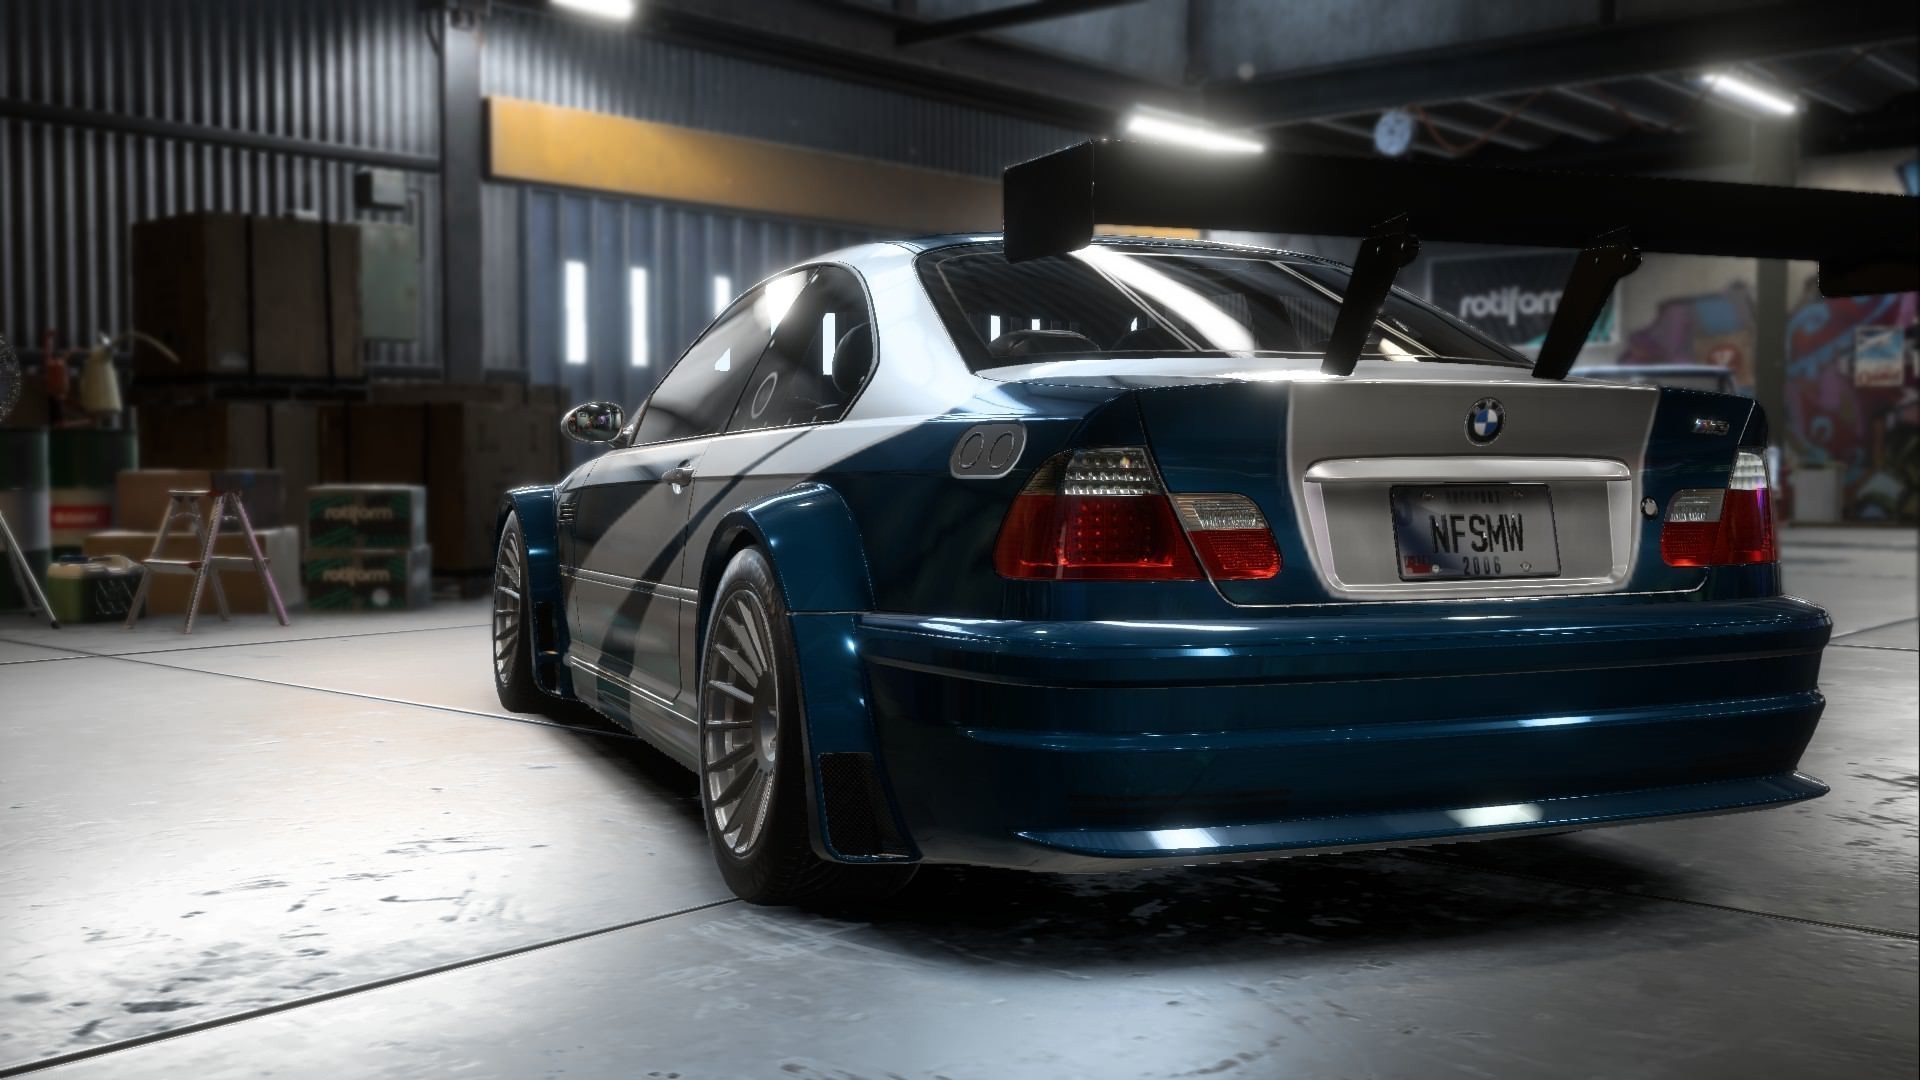 Wallpaper : E 46, Forza Horizon 4, Need for Speed, Need for Speed Most  Wanted, Drifting, BMW M3 E46 GTR, BMW E46, BMW 3 Series, sunset, fall  1920x1080 - arvulic - 1795111 - HD Wallpapers - WallHere